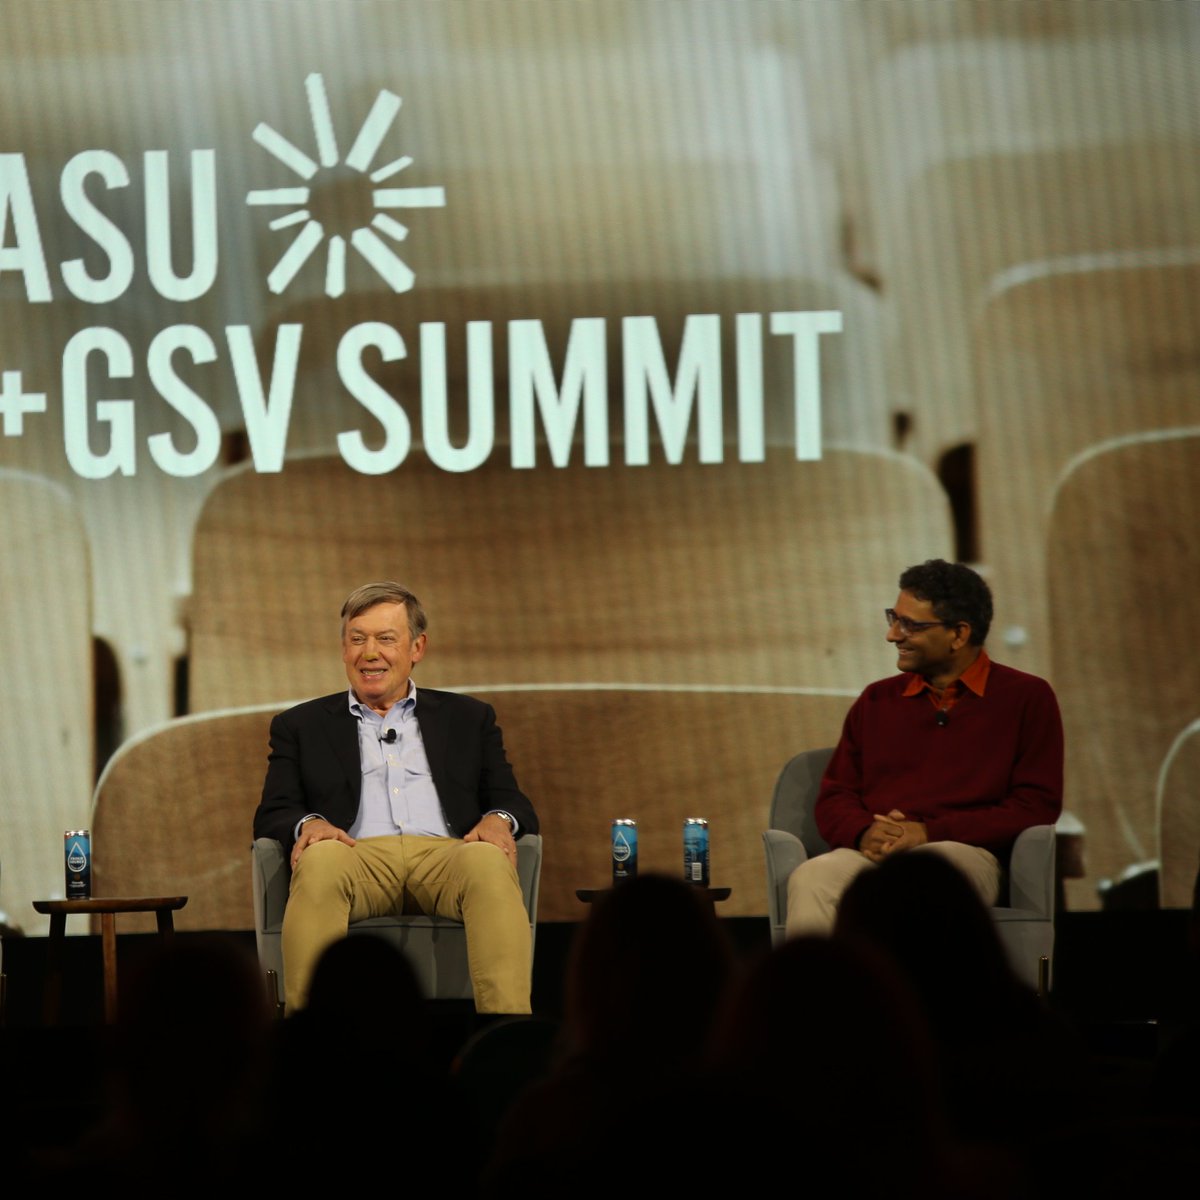 Thanks again to all who joined me at last week's #ASUGSVSummit. To catch up on or revisit videos on the future of AI, gaming, higher ed collaboration, the ed tech revolution, and the role of universities in advancing democracy, visit president.asu.edu/watch.